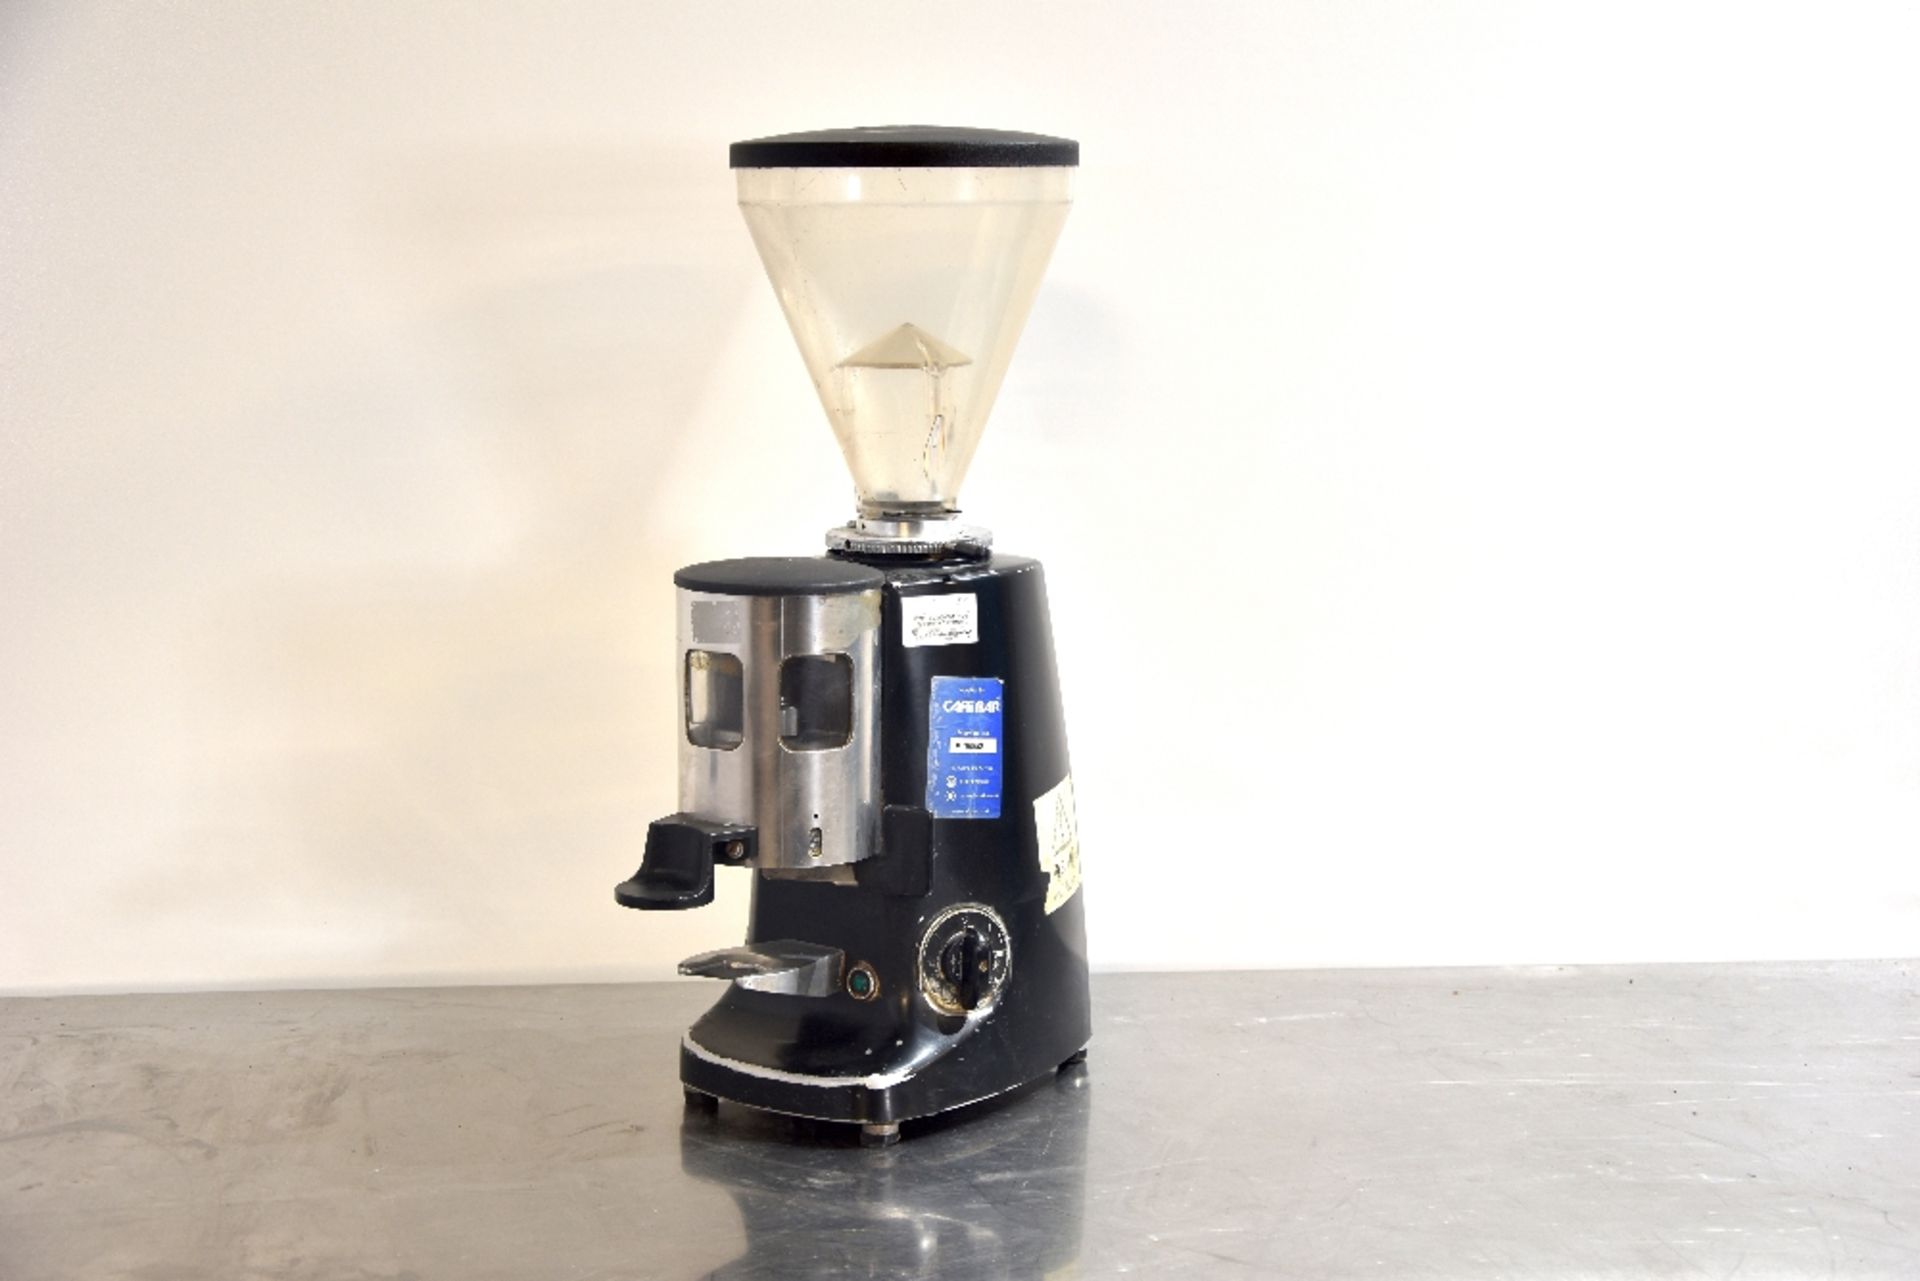 Mazzer Commercial Coffee Bean Grinder -1ph – Tested Working